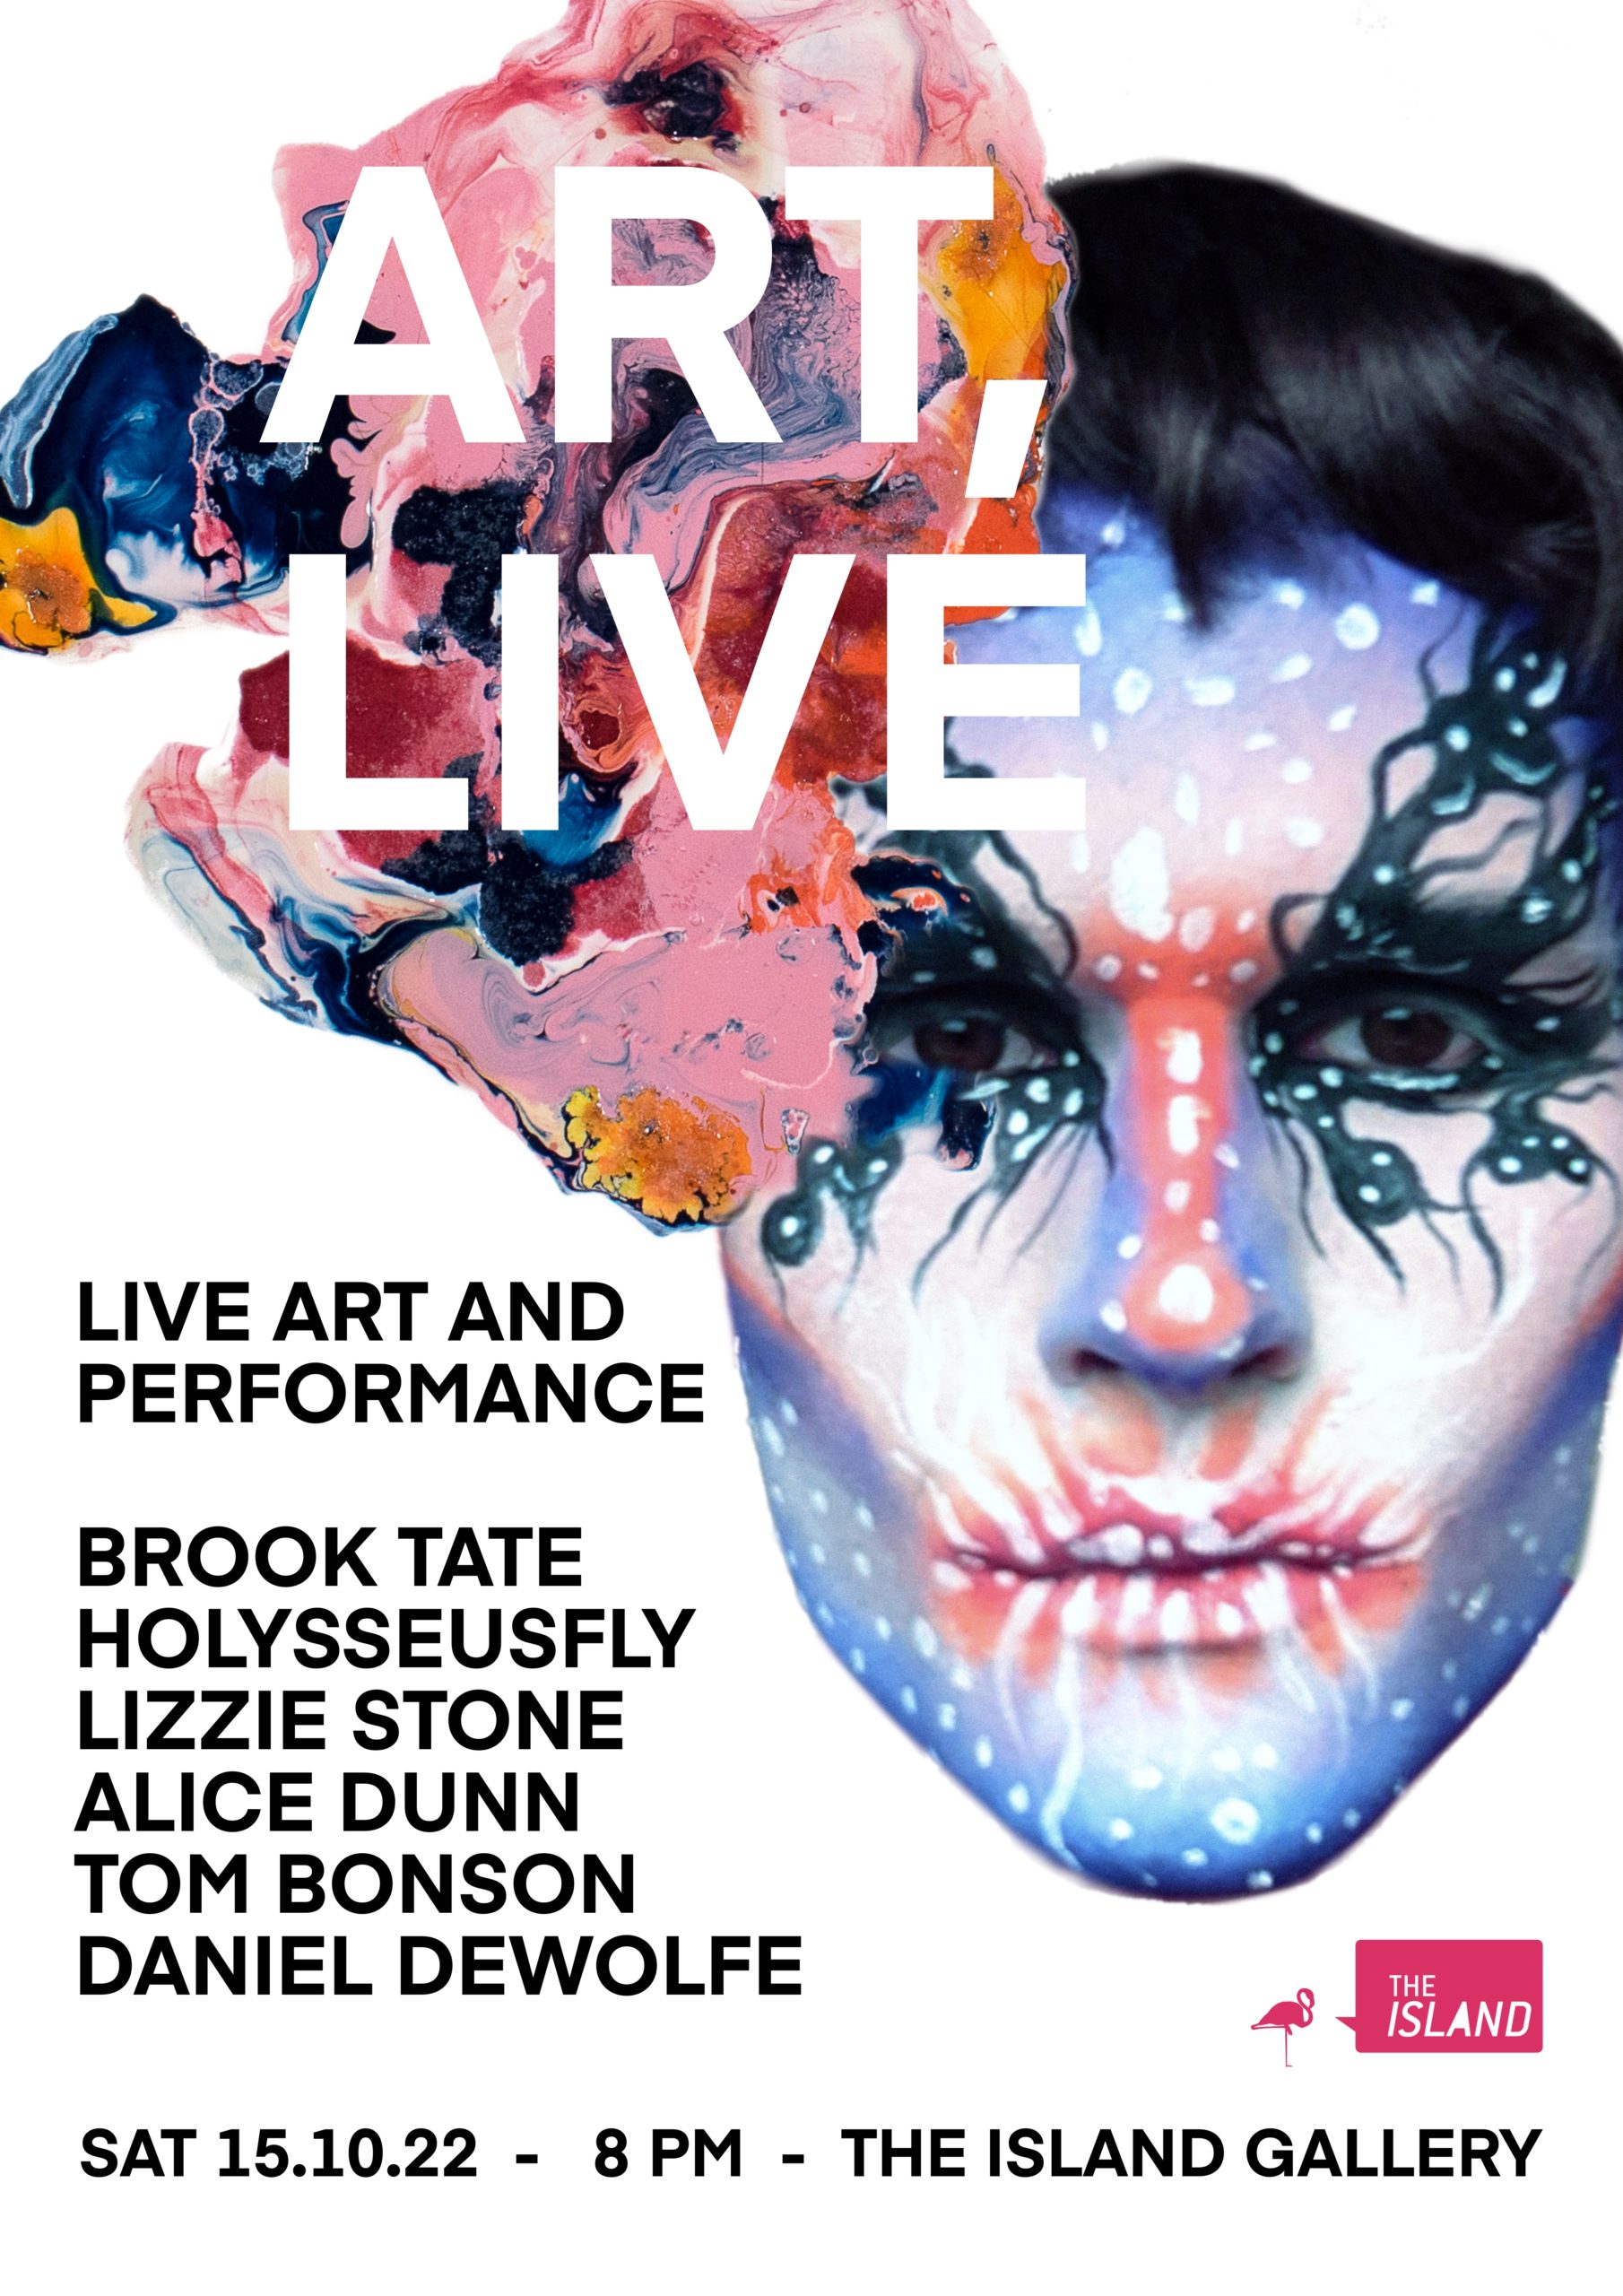 Poster design featuring a woman's face painted with organic patterns in pastel tones.